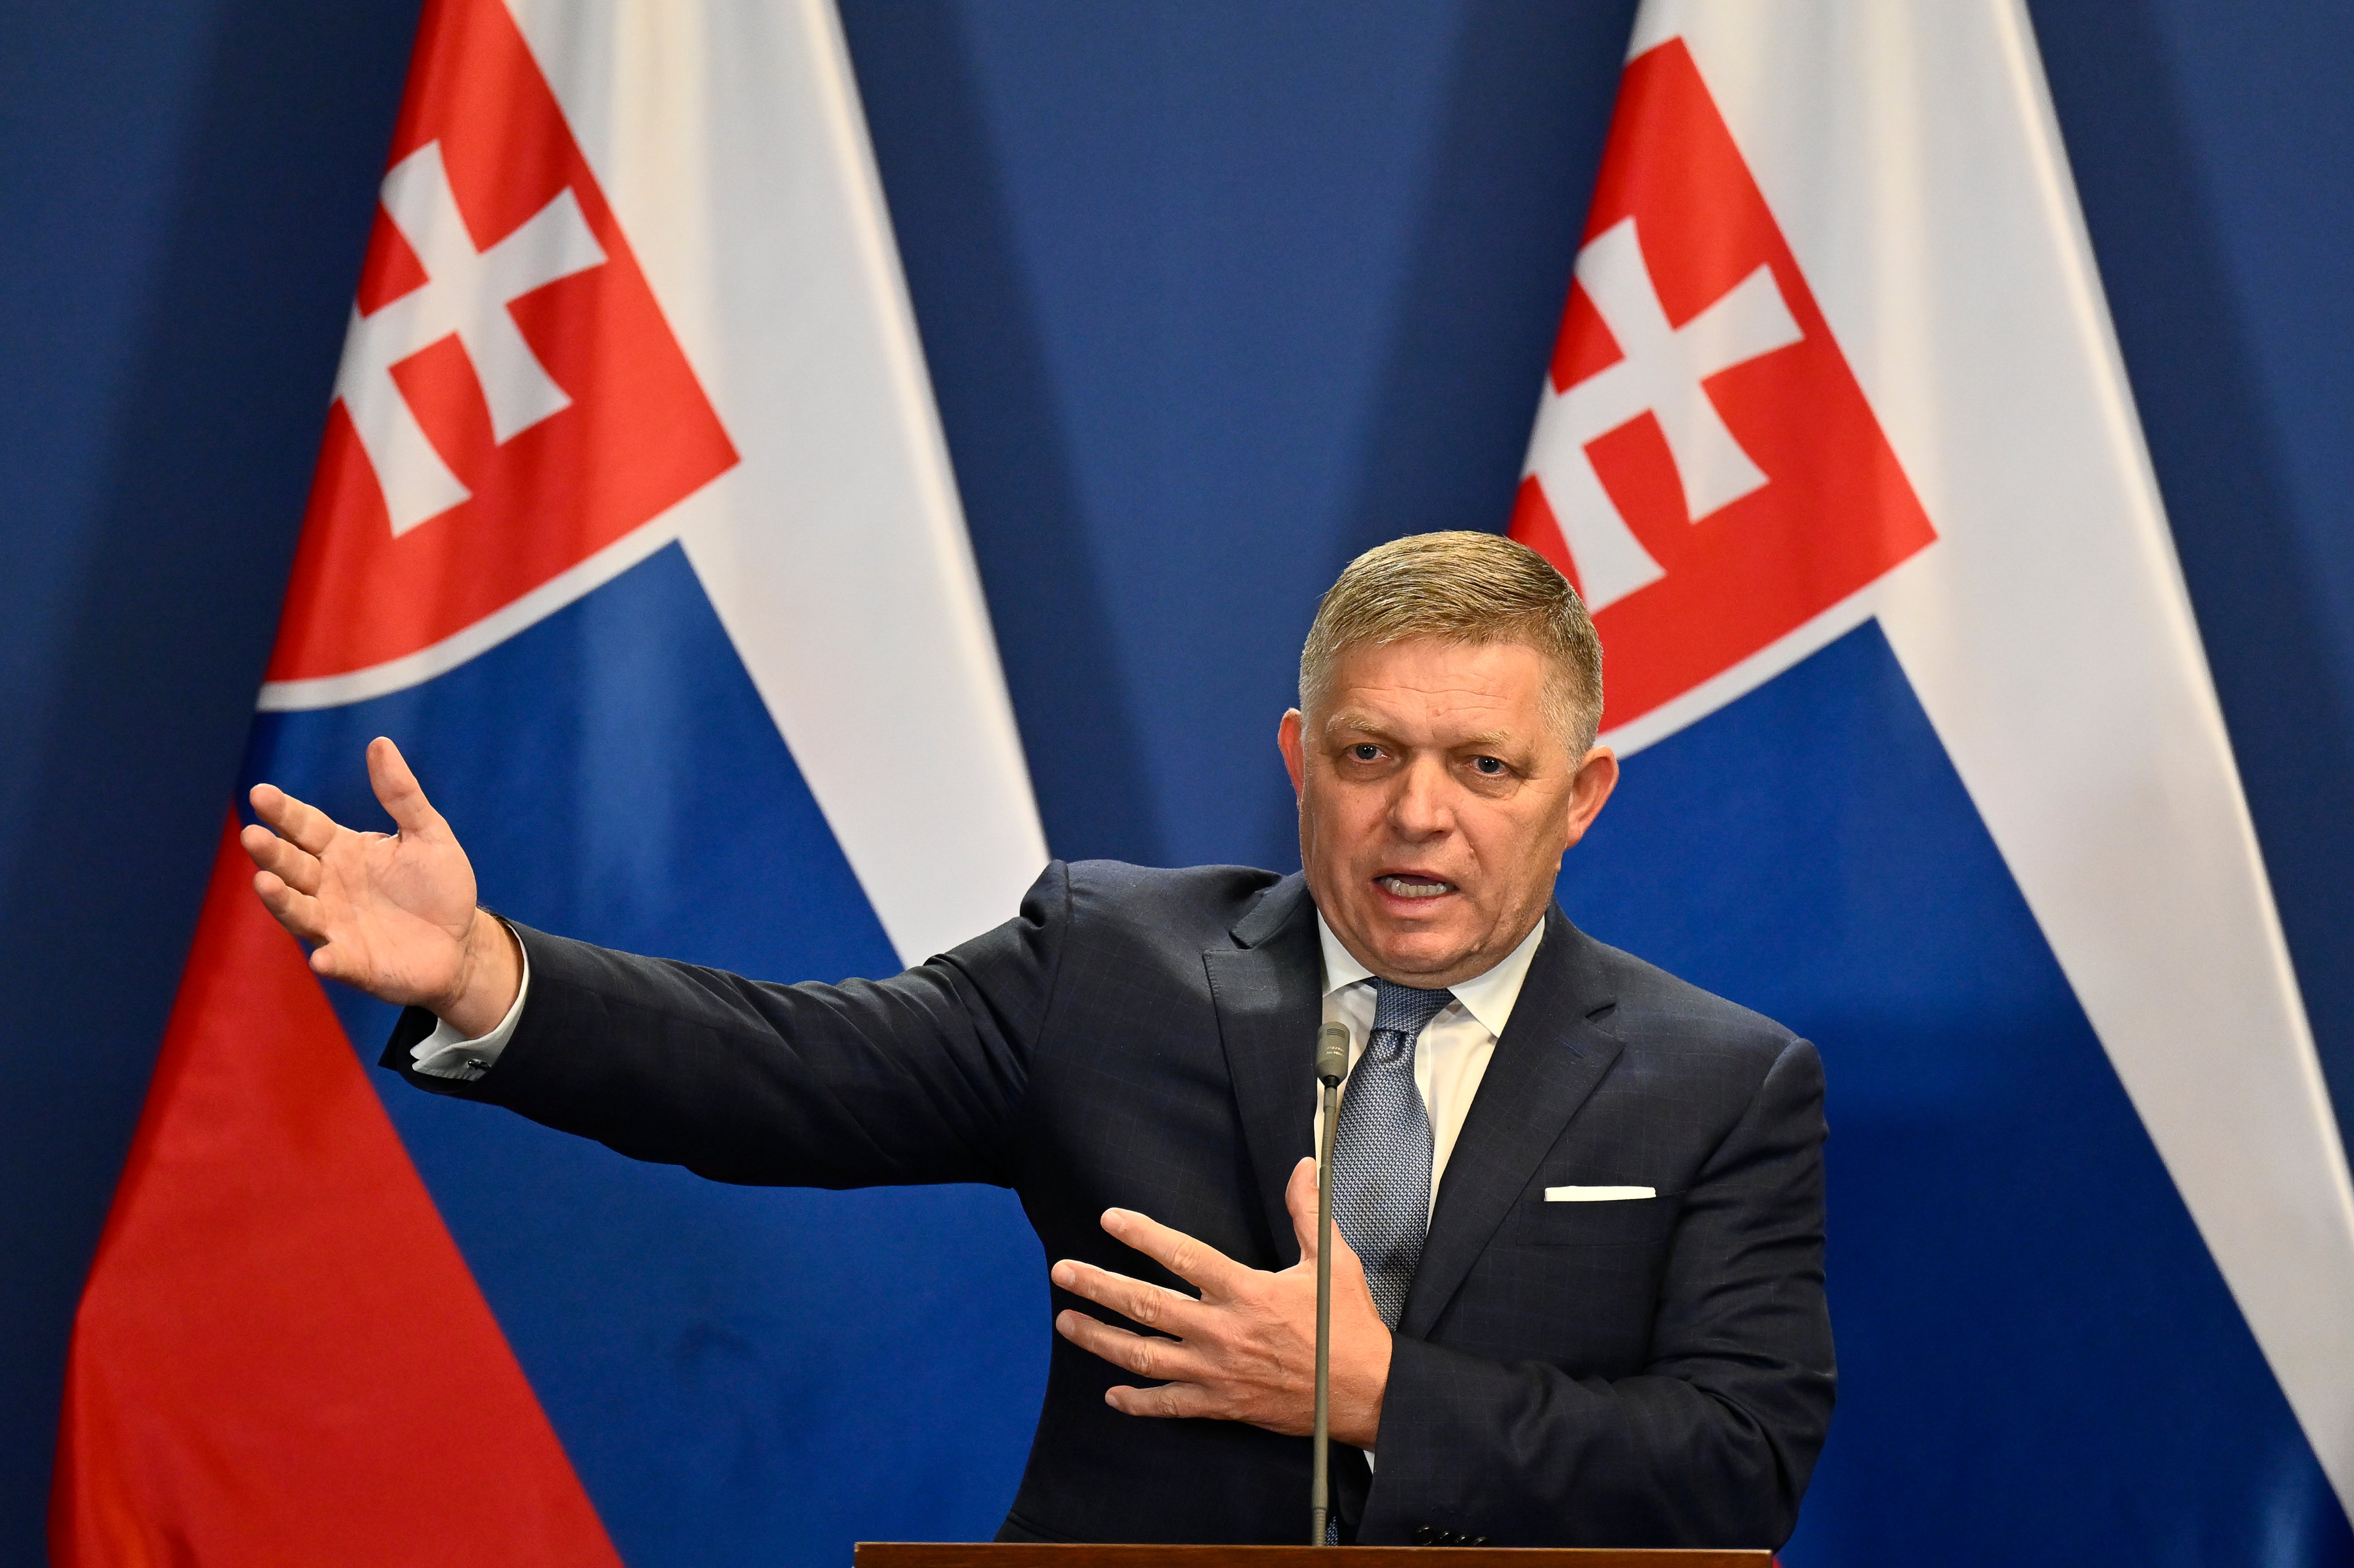 Populist prime minister Robert Fico, 59, was shot in the stomach in a ‘brutal attack’ in Slovakia on Wednesday